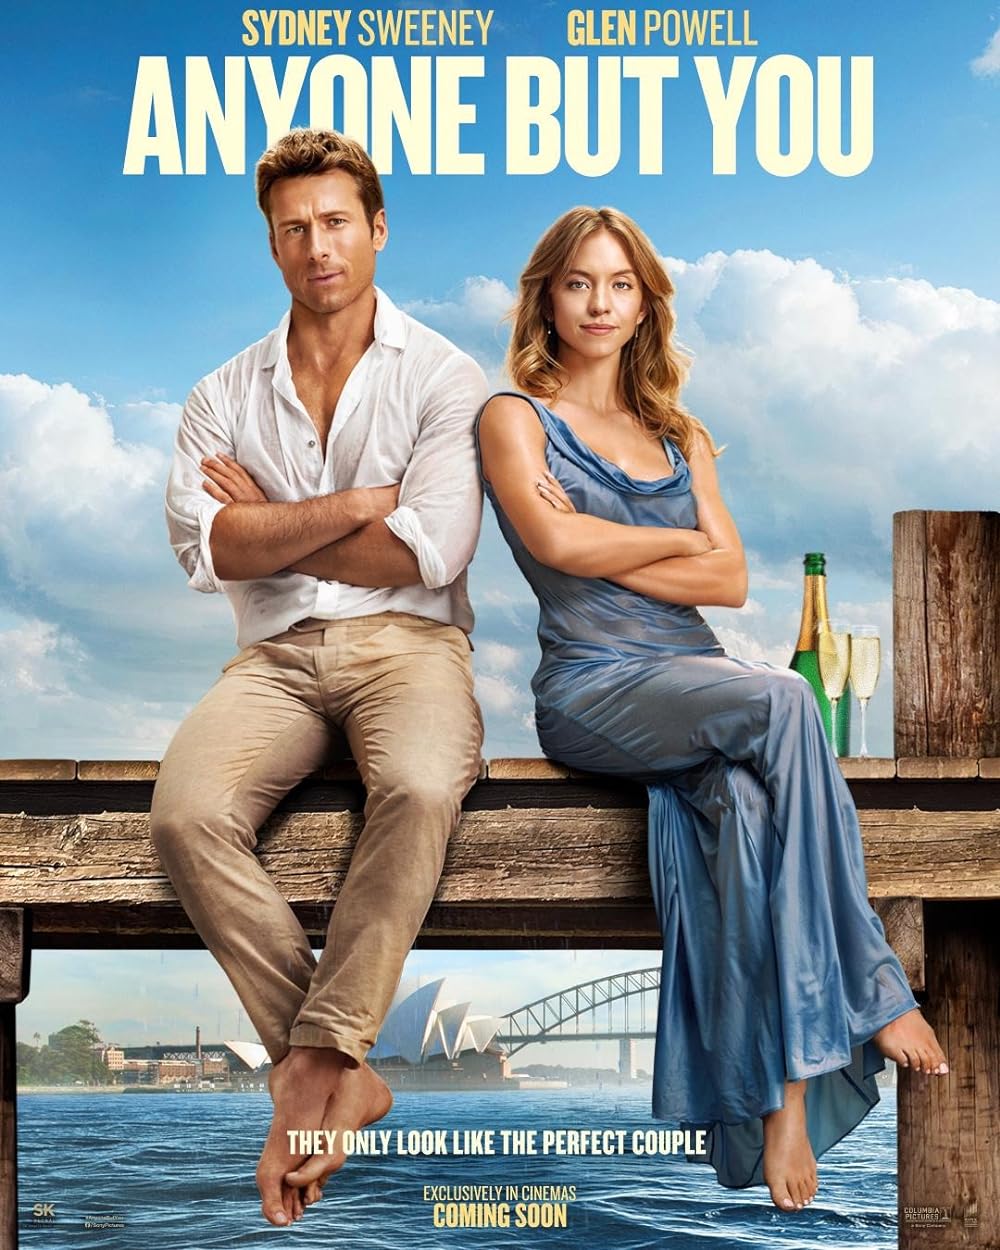 Anyone but You (February 27) - Streaming on Prime VideoAnyone but You cleverly reimagines Shakespeare’s Much Ado About Nothing for the modern day, bringing a romantic comedy featuring Sydney Sweeney and Glen Powell. Focusing on Bea and Ben’s tumultuous relationship that evolves from a disastrous one-night stand to feigned dating amidst family and ex-partner dramas. Against the backdrop of an Australian wedding, the two gradually navigate their misunderstandings, transforming their initial disdain into genuine affection.